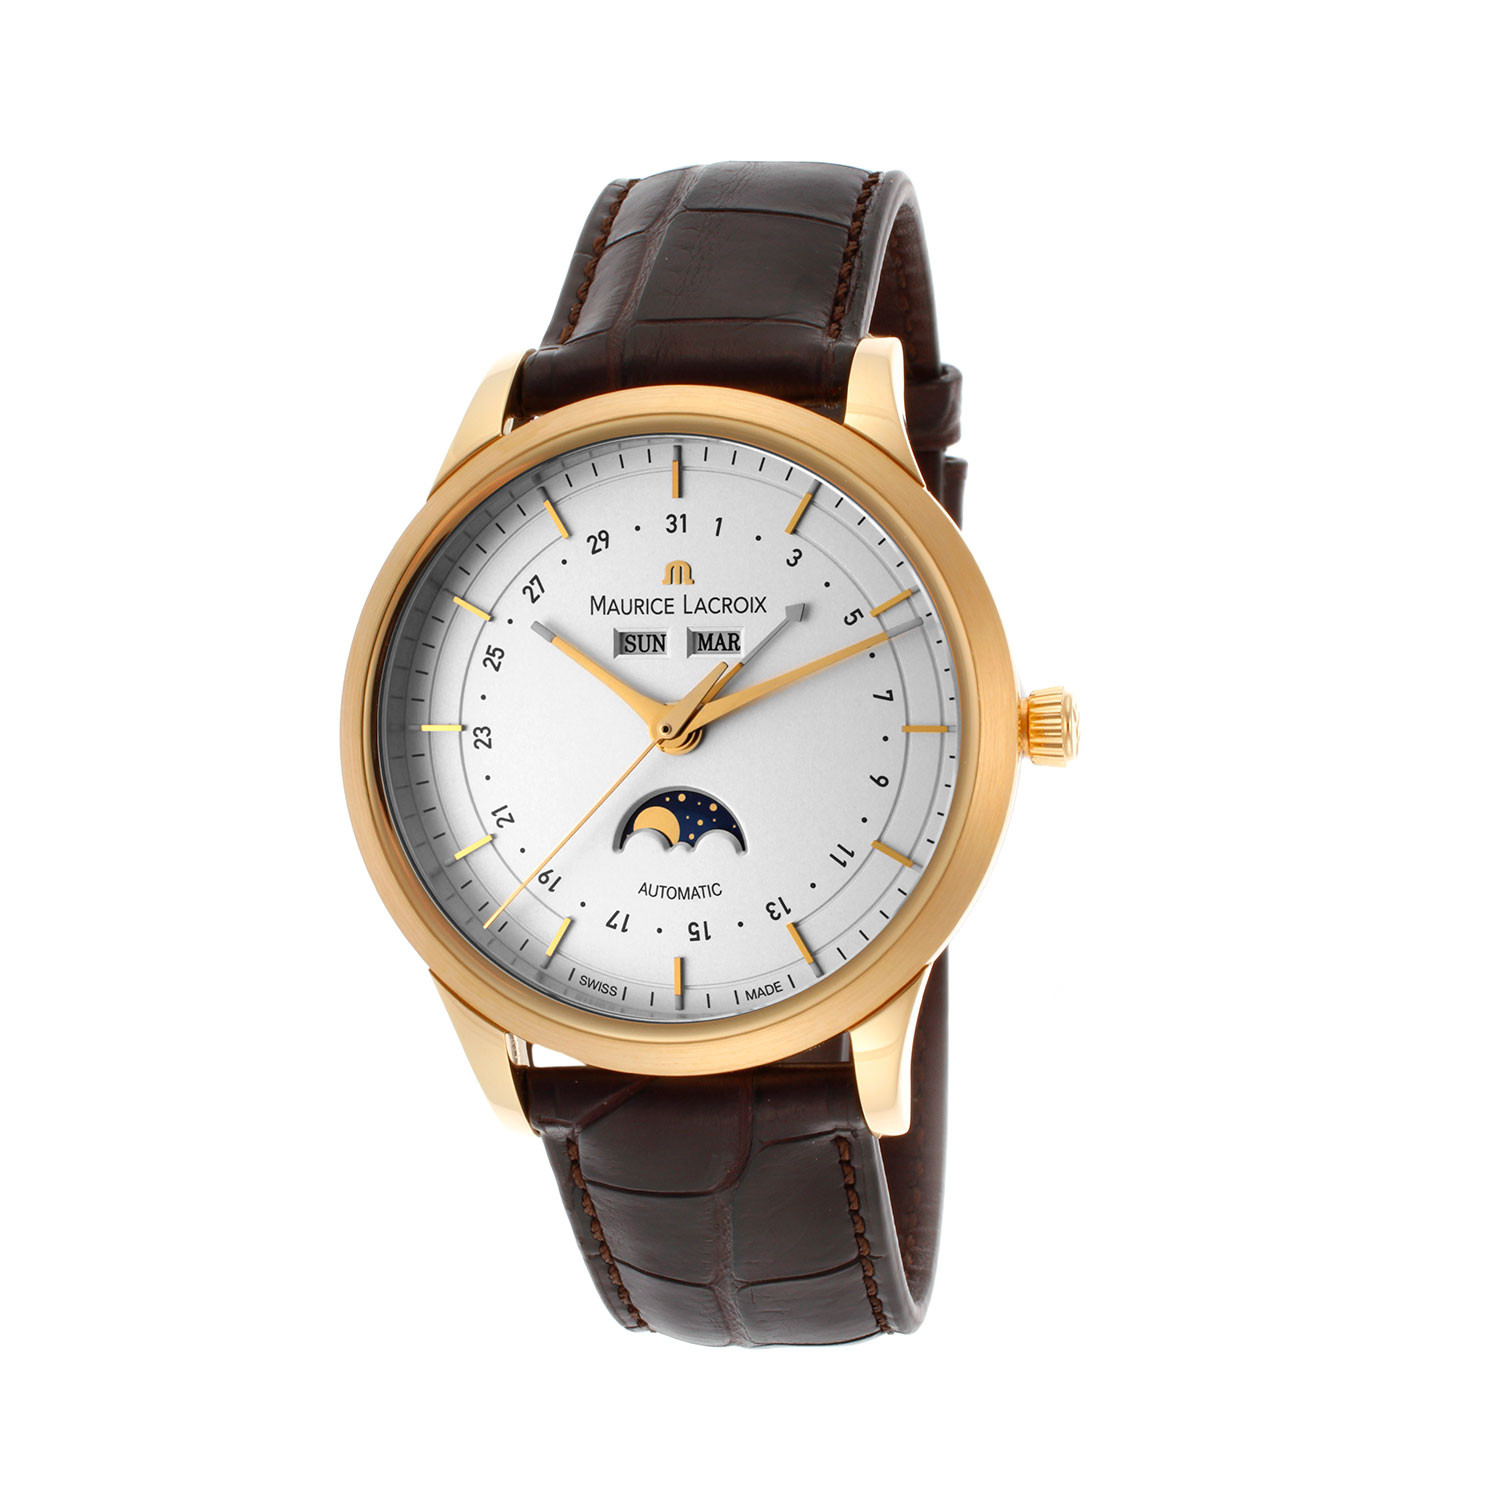 Les Classiques Phase de Lune in Yellow Gold on Brown Alligator Leather Strap with Silver Dial